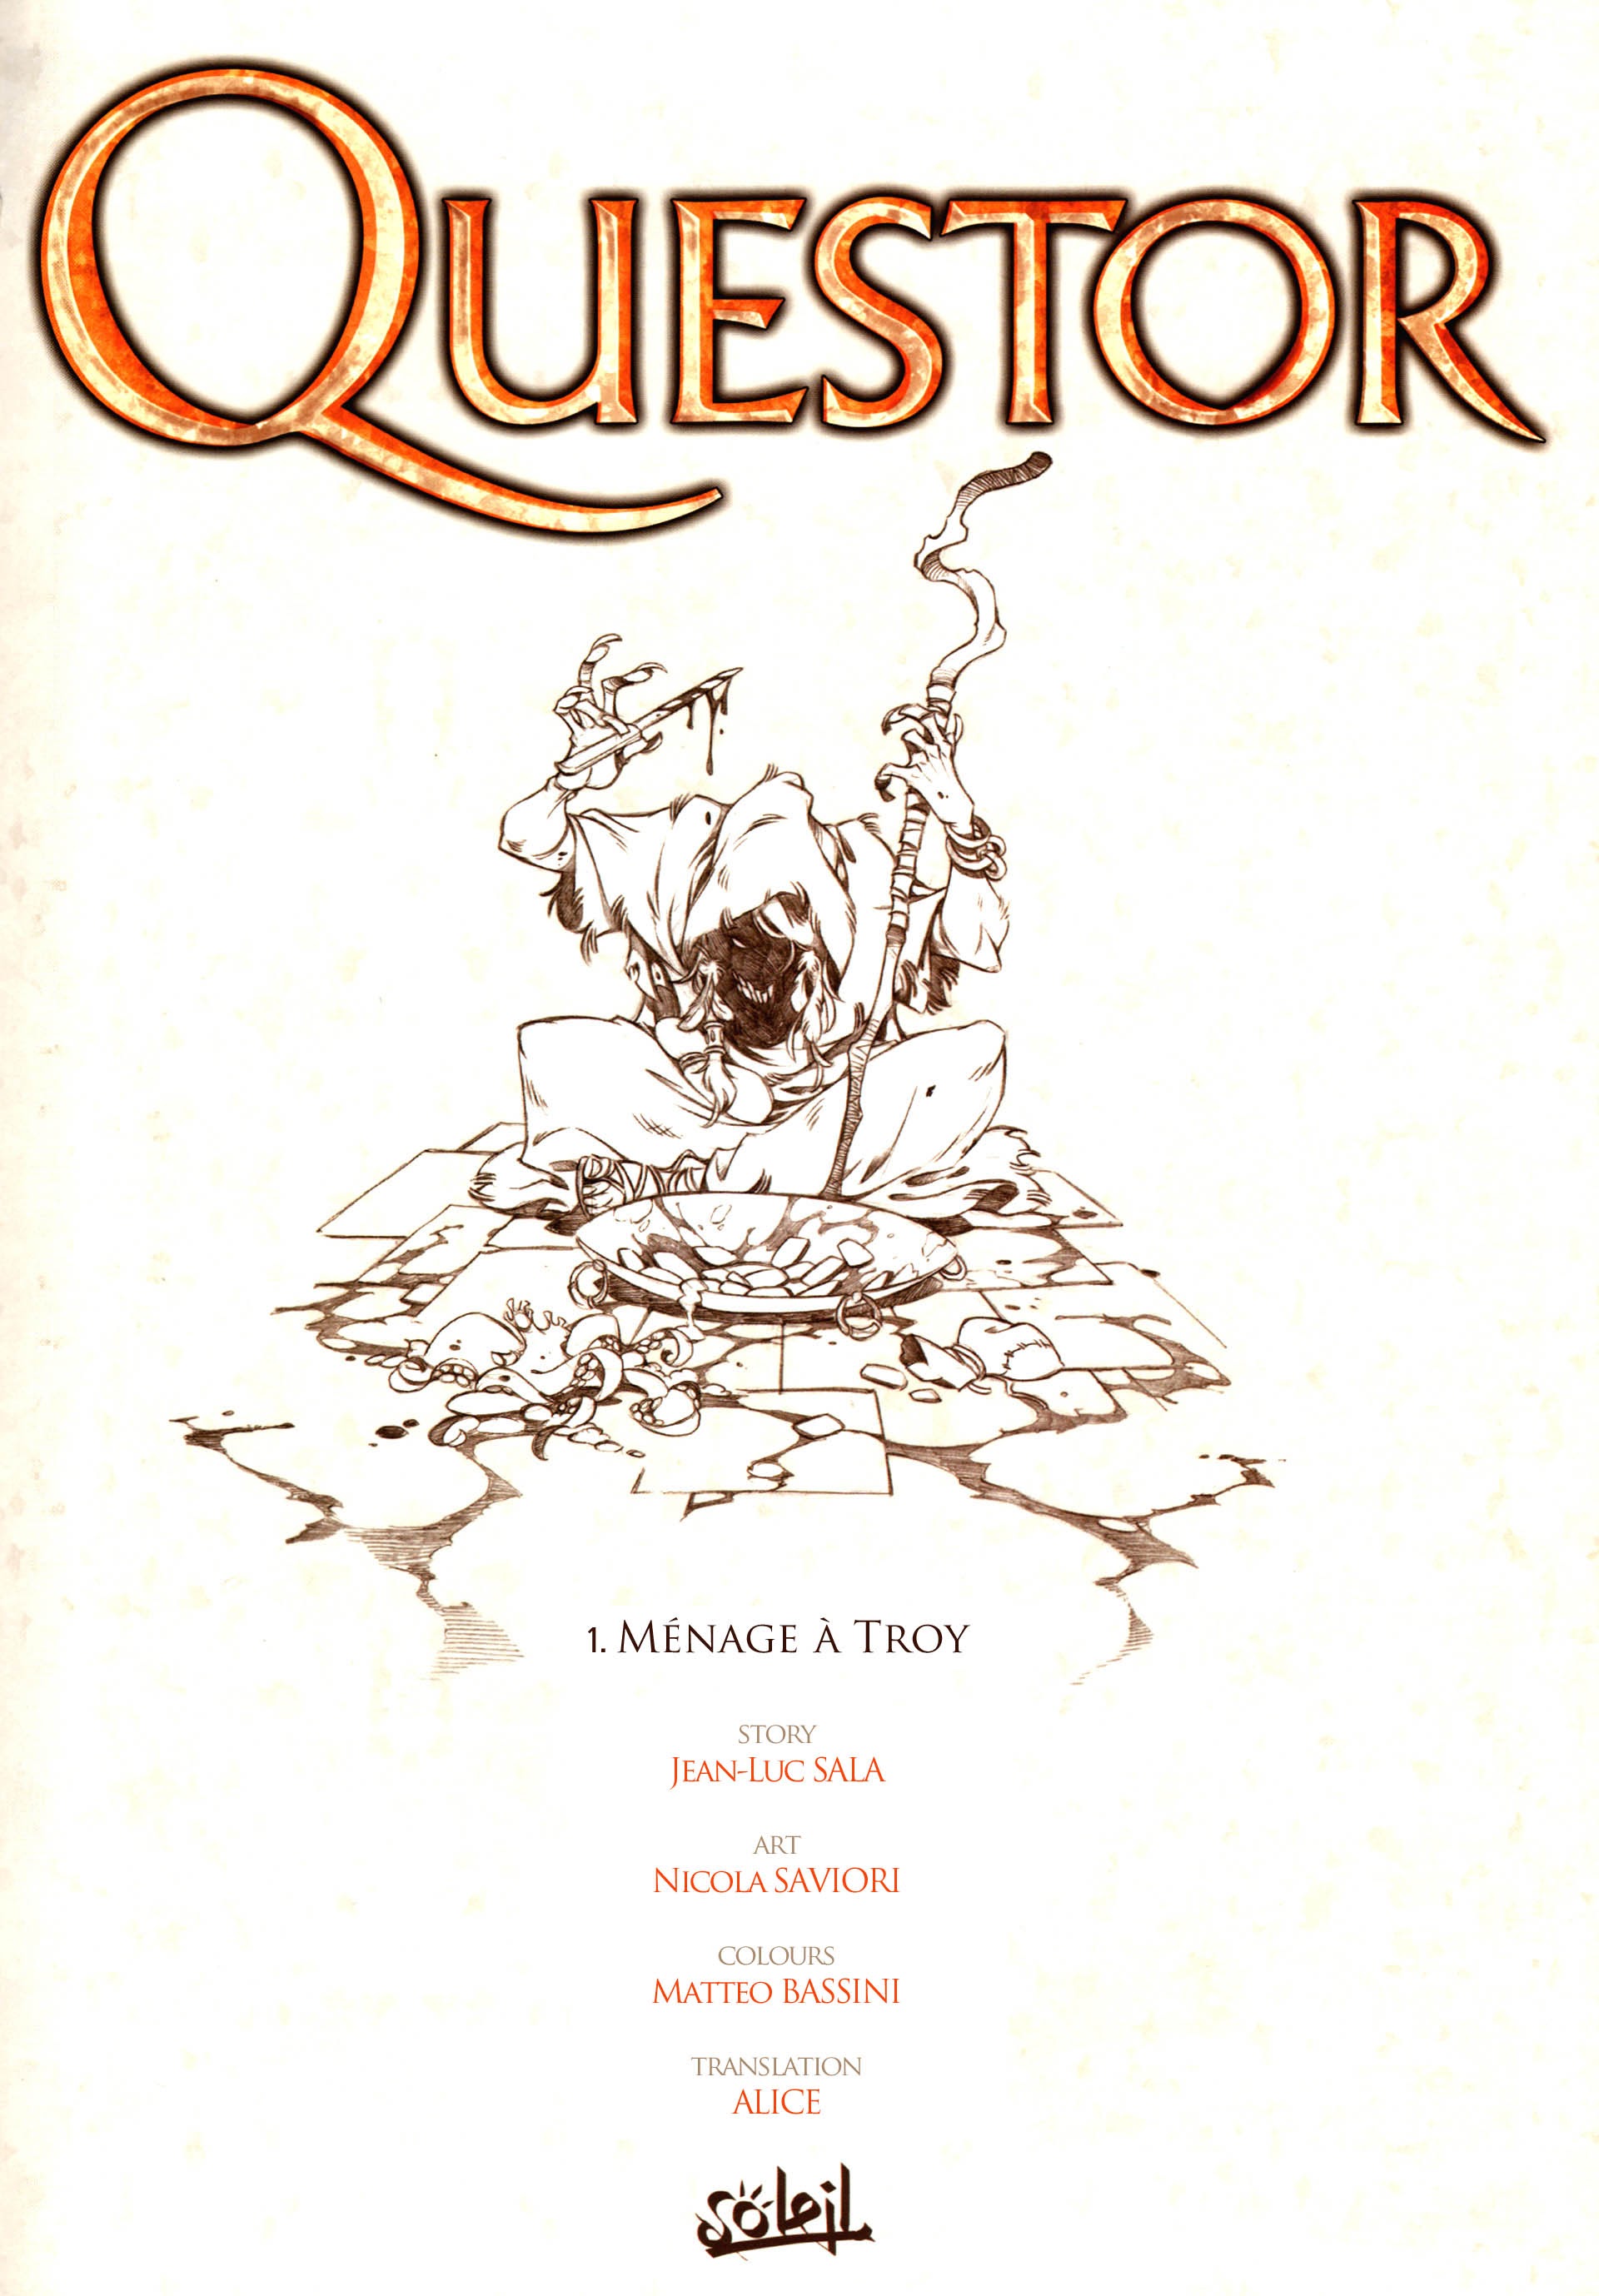 Read online Questor comic -  Issue #1 - 3